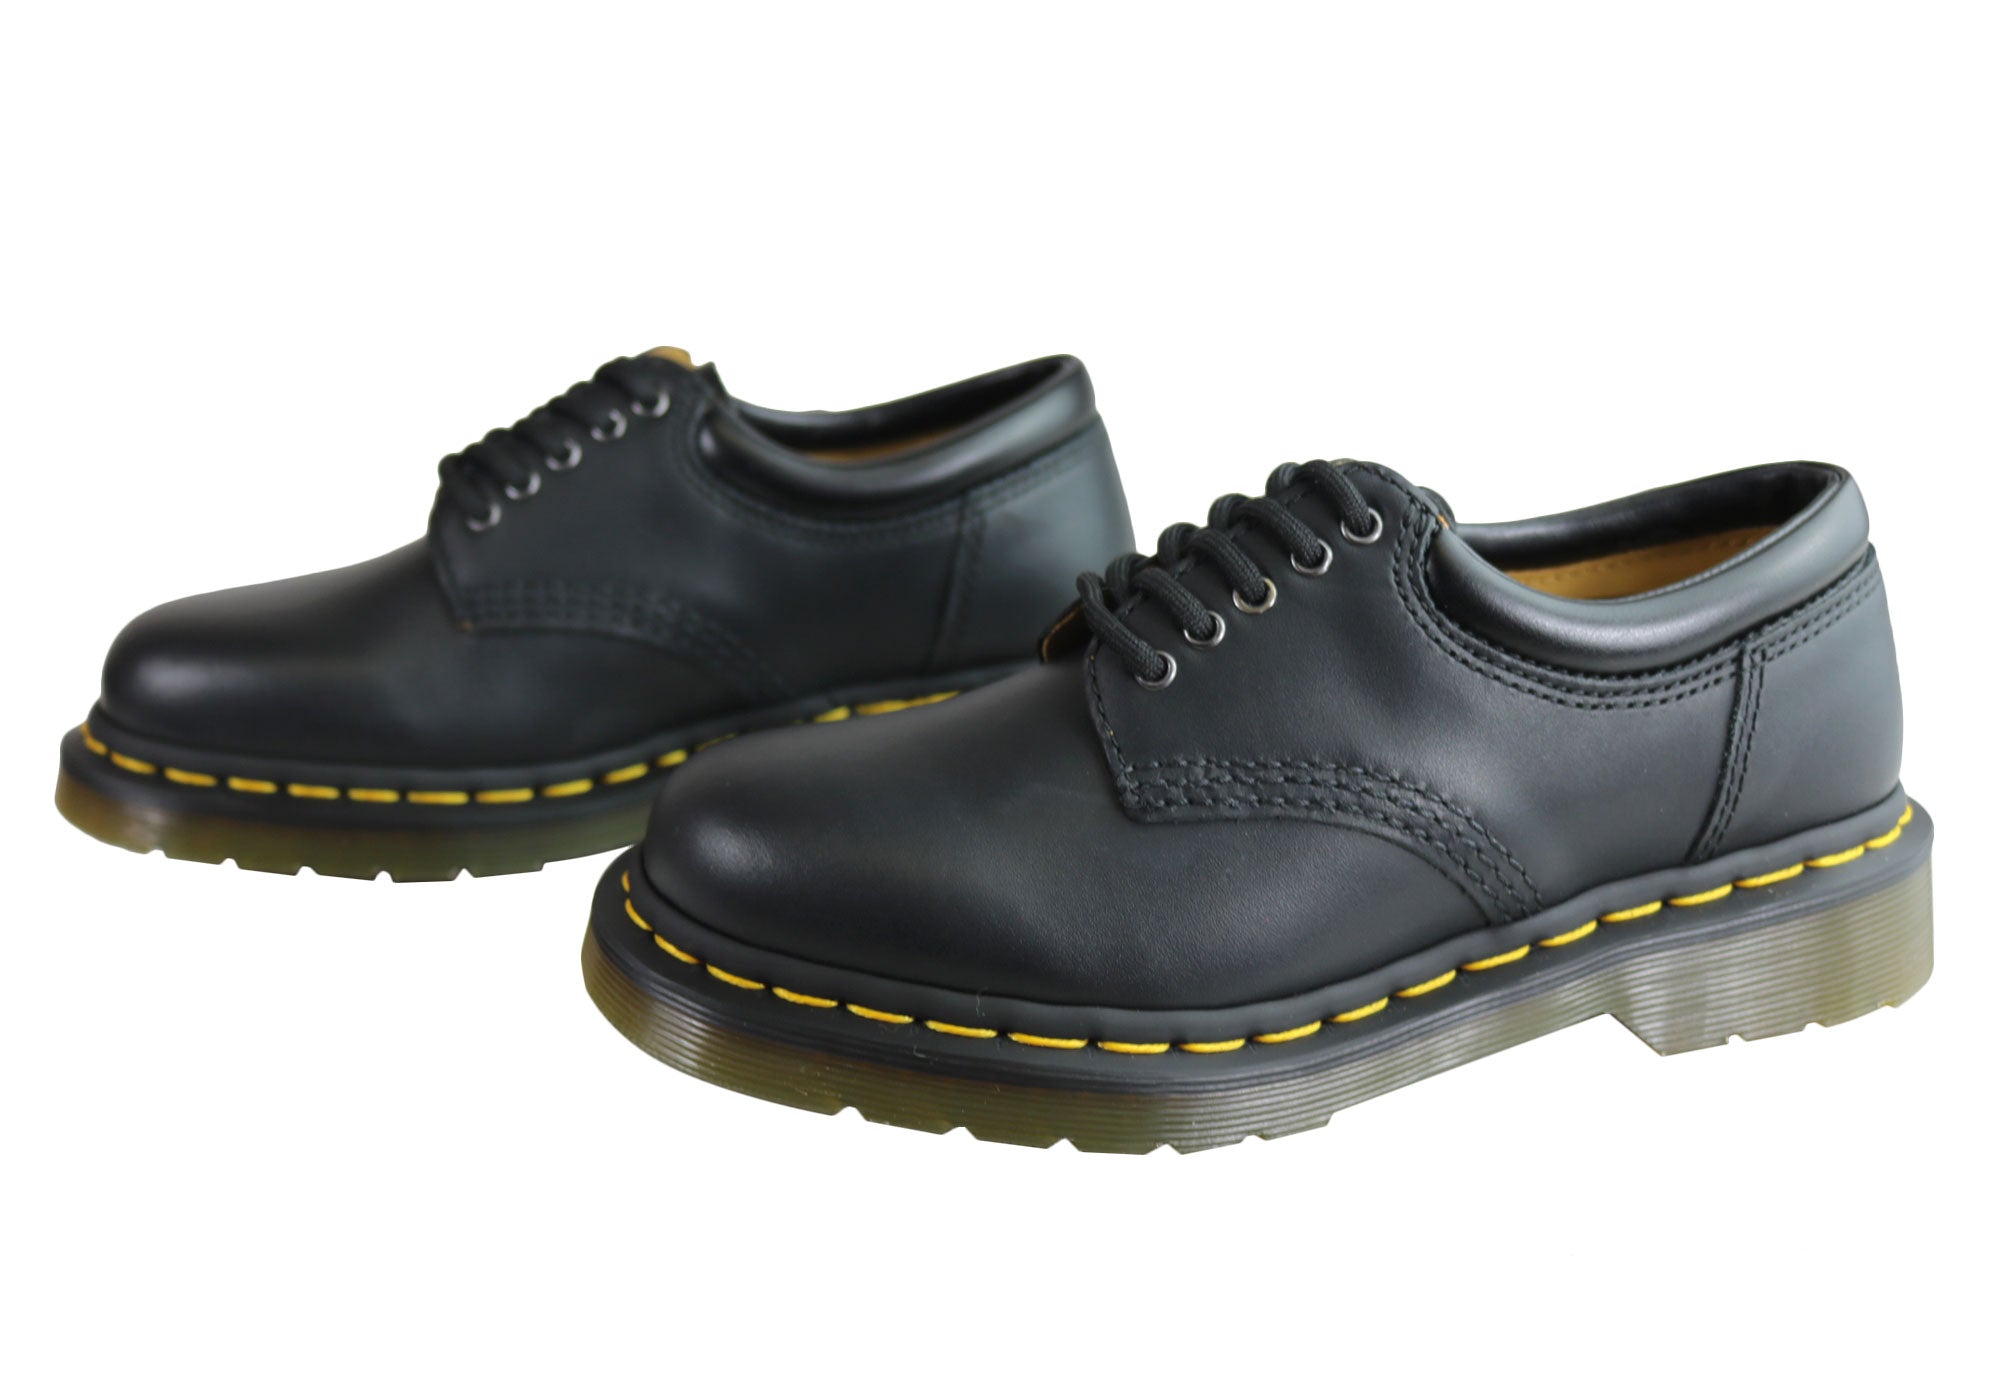 Dr Martens 8053 Black Nappa Lace Up Shoes | Brand House Direct